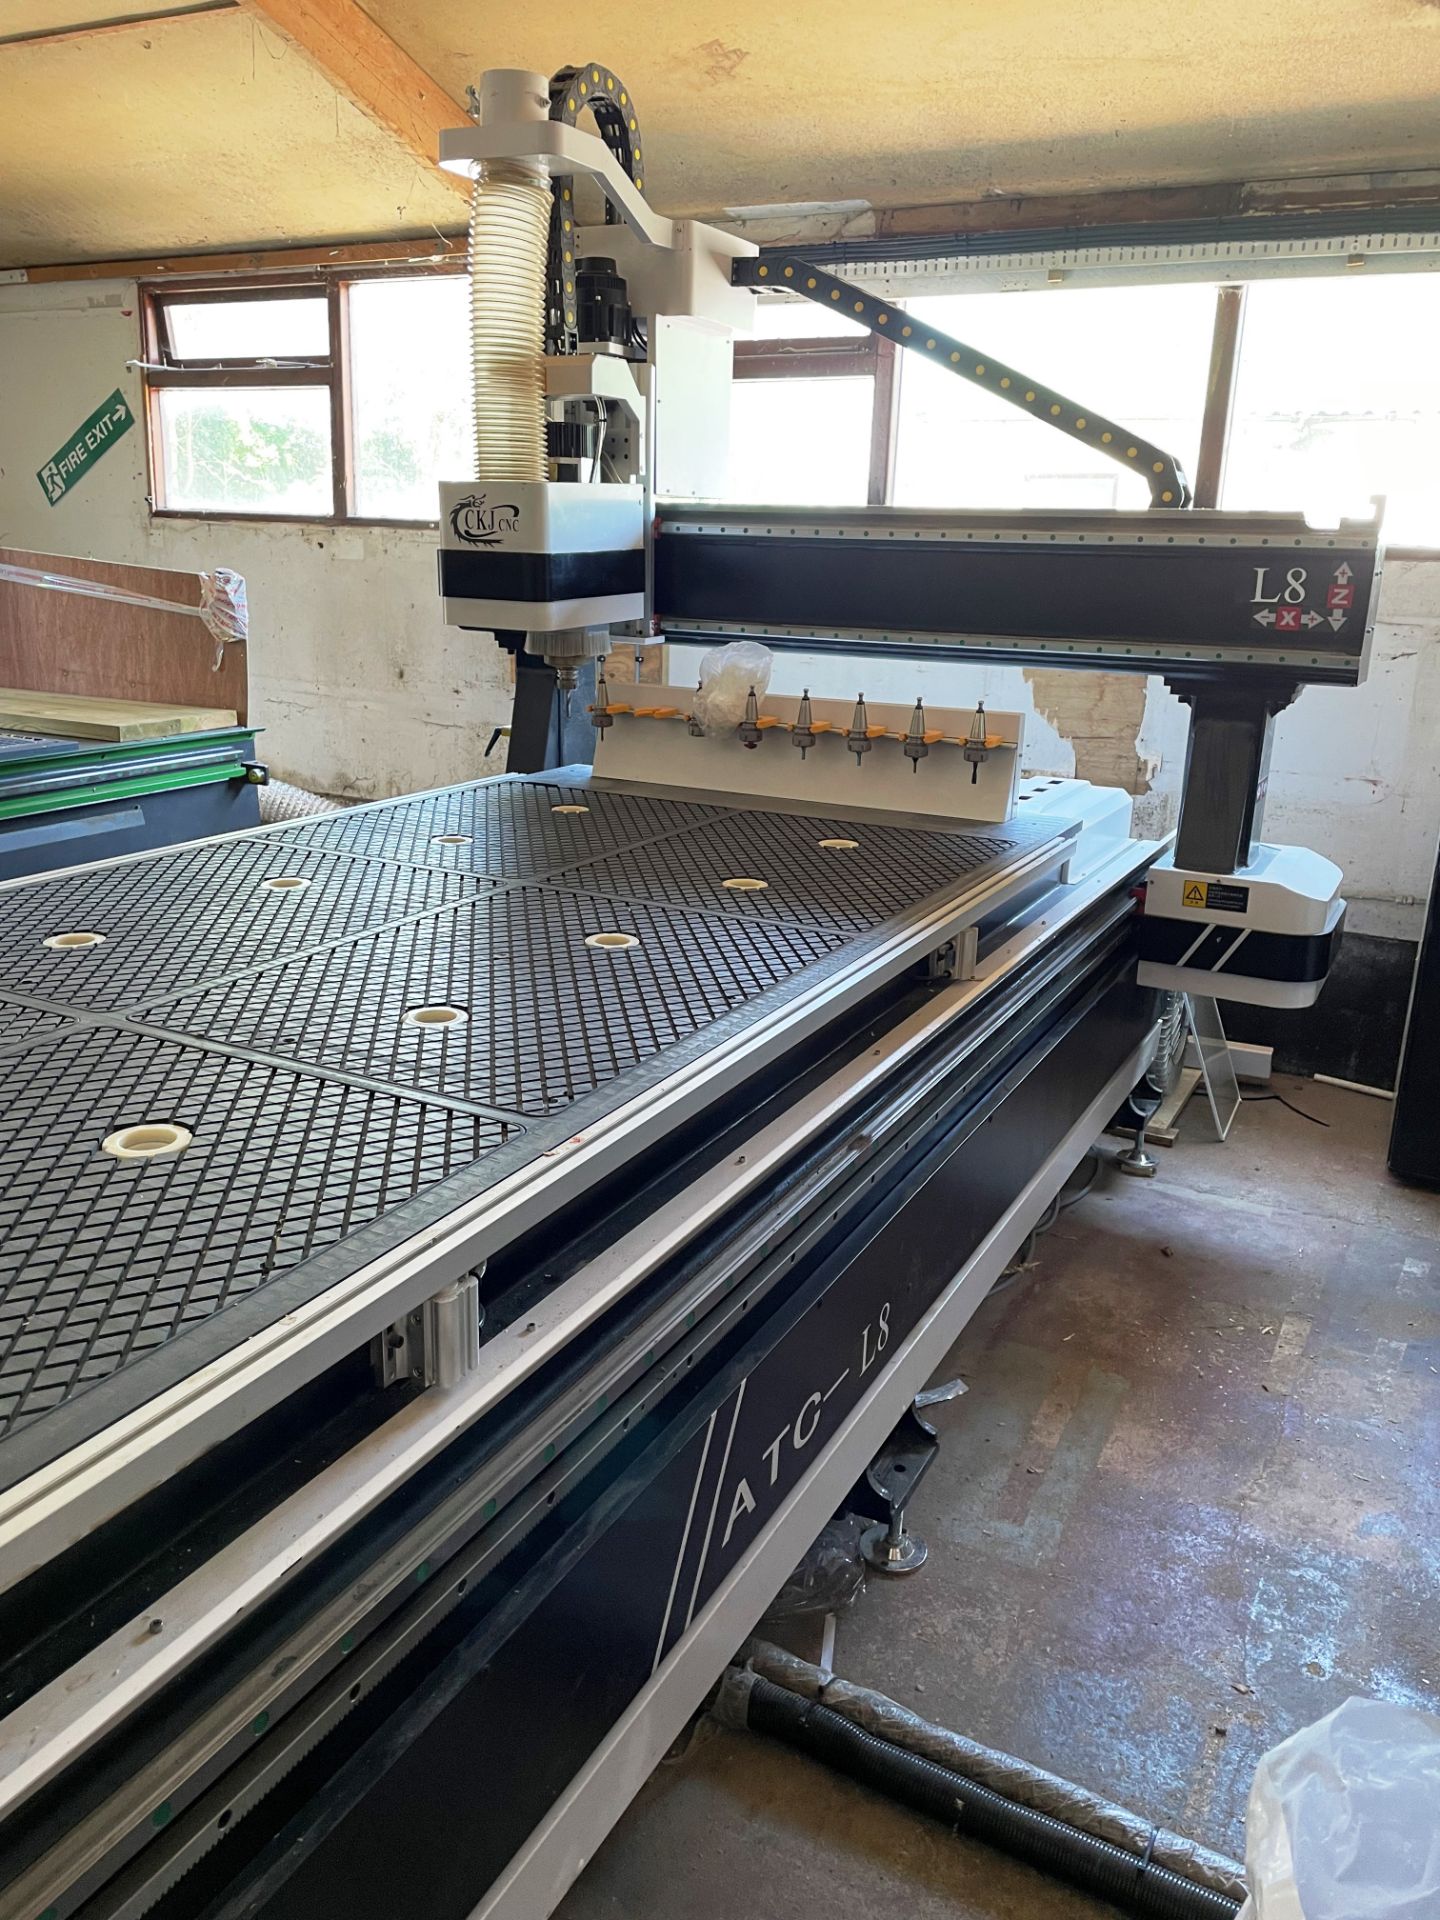 CKJ Linear ATC L8 CNC Router | Bed Size: 2500 X 1300 | YOM: 2020 - Image 12 of 18